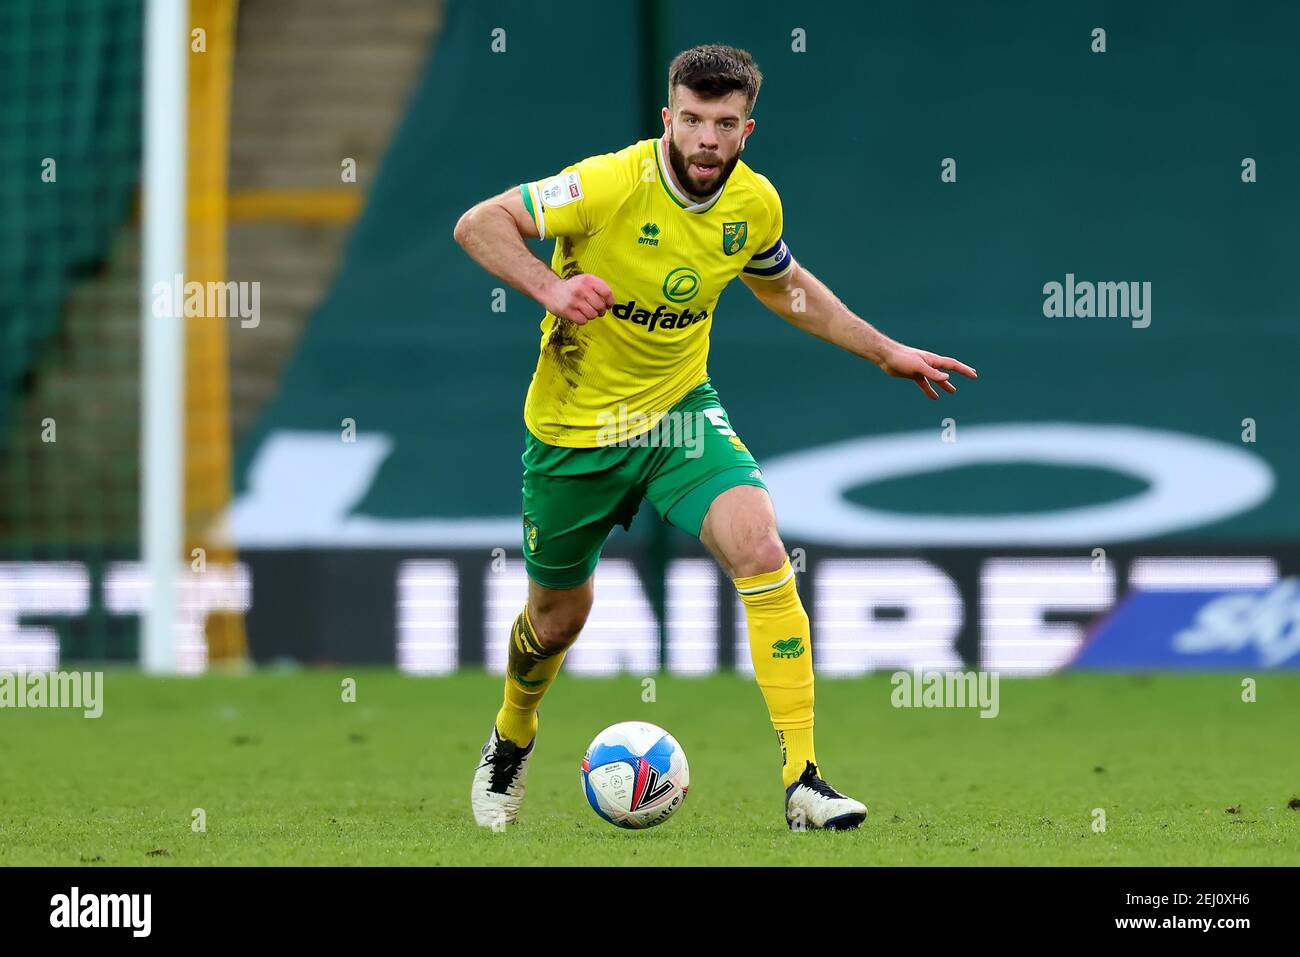 20th February 2021; Carrow Road, Norwich, Norfolk, England, English Football League Championship Football, Norwich versus Rotherham United; Grant Hanley of Norwich City Stock Photo